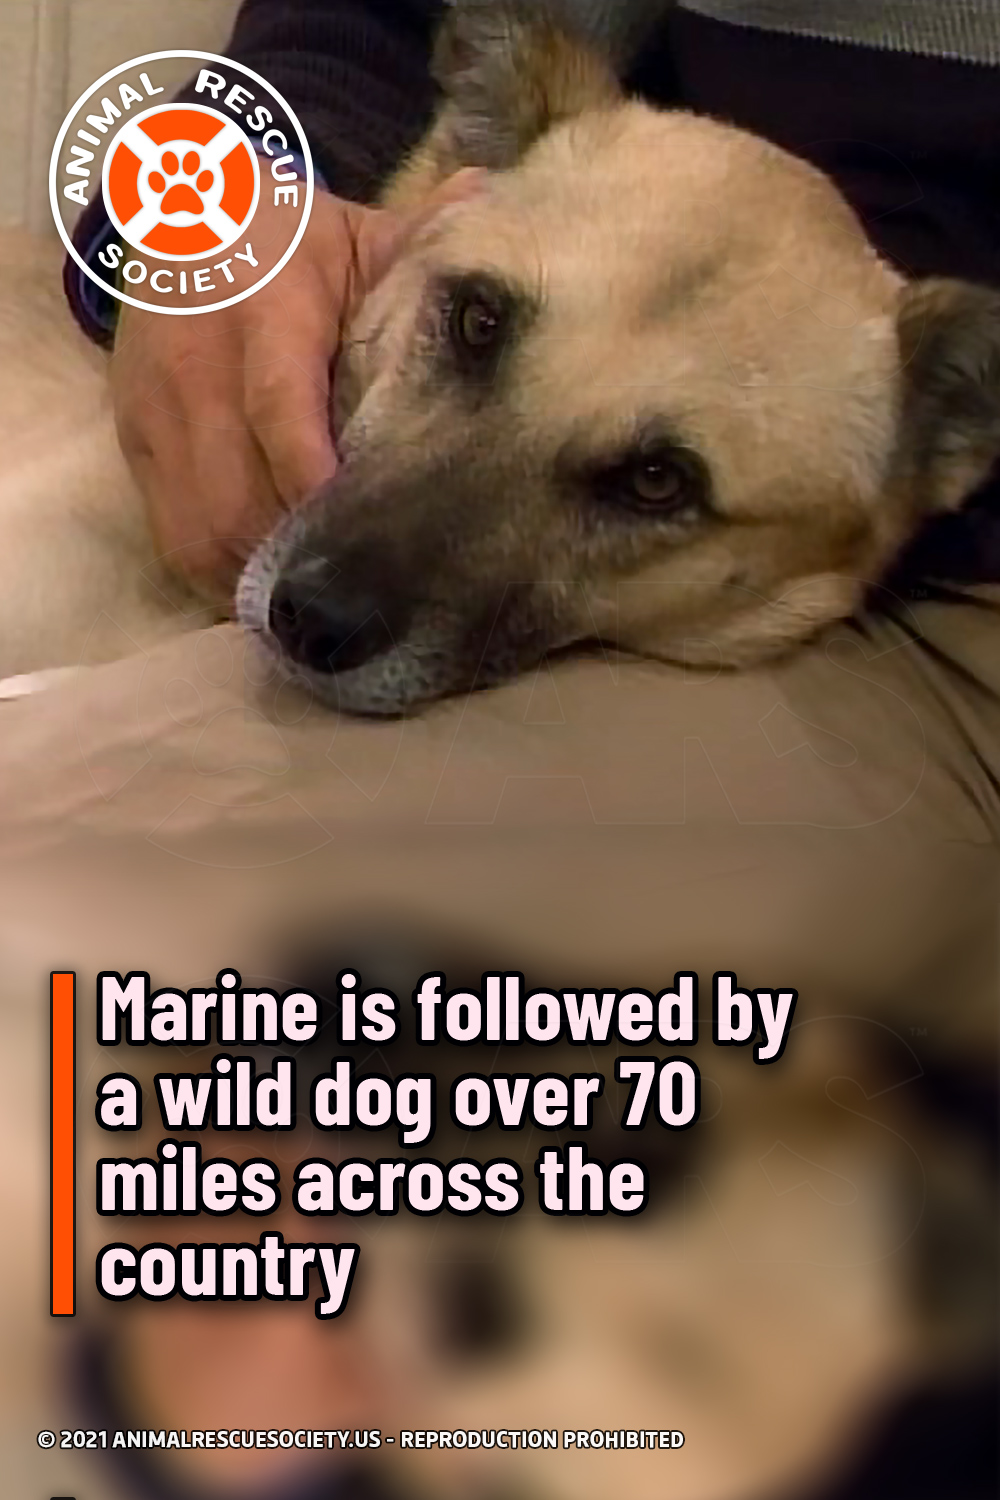 Marine is followed by a wild dog over 70 miles across the country